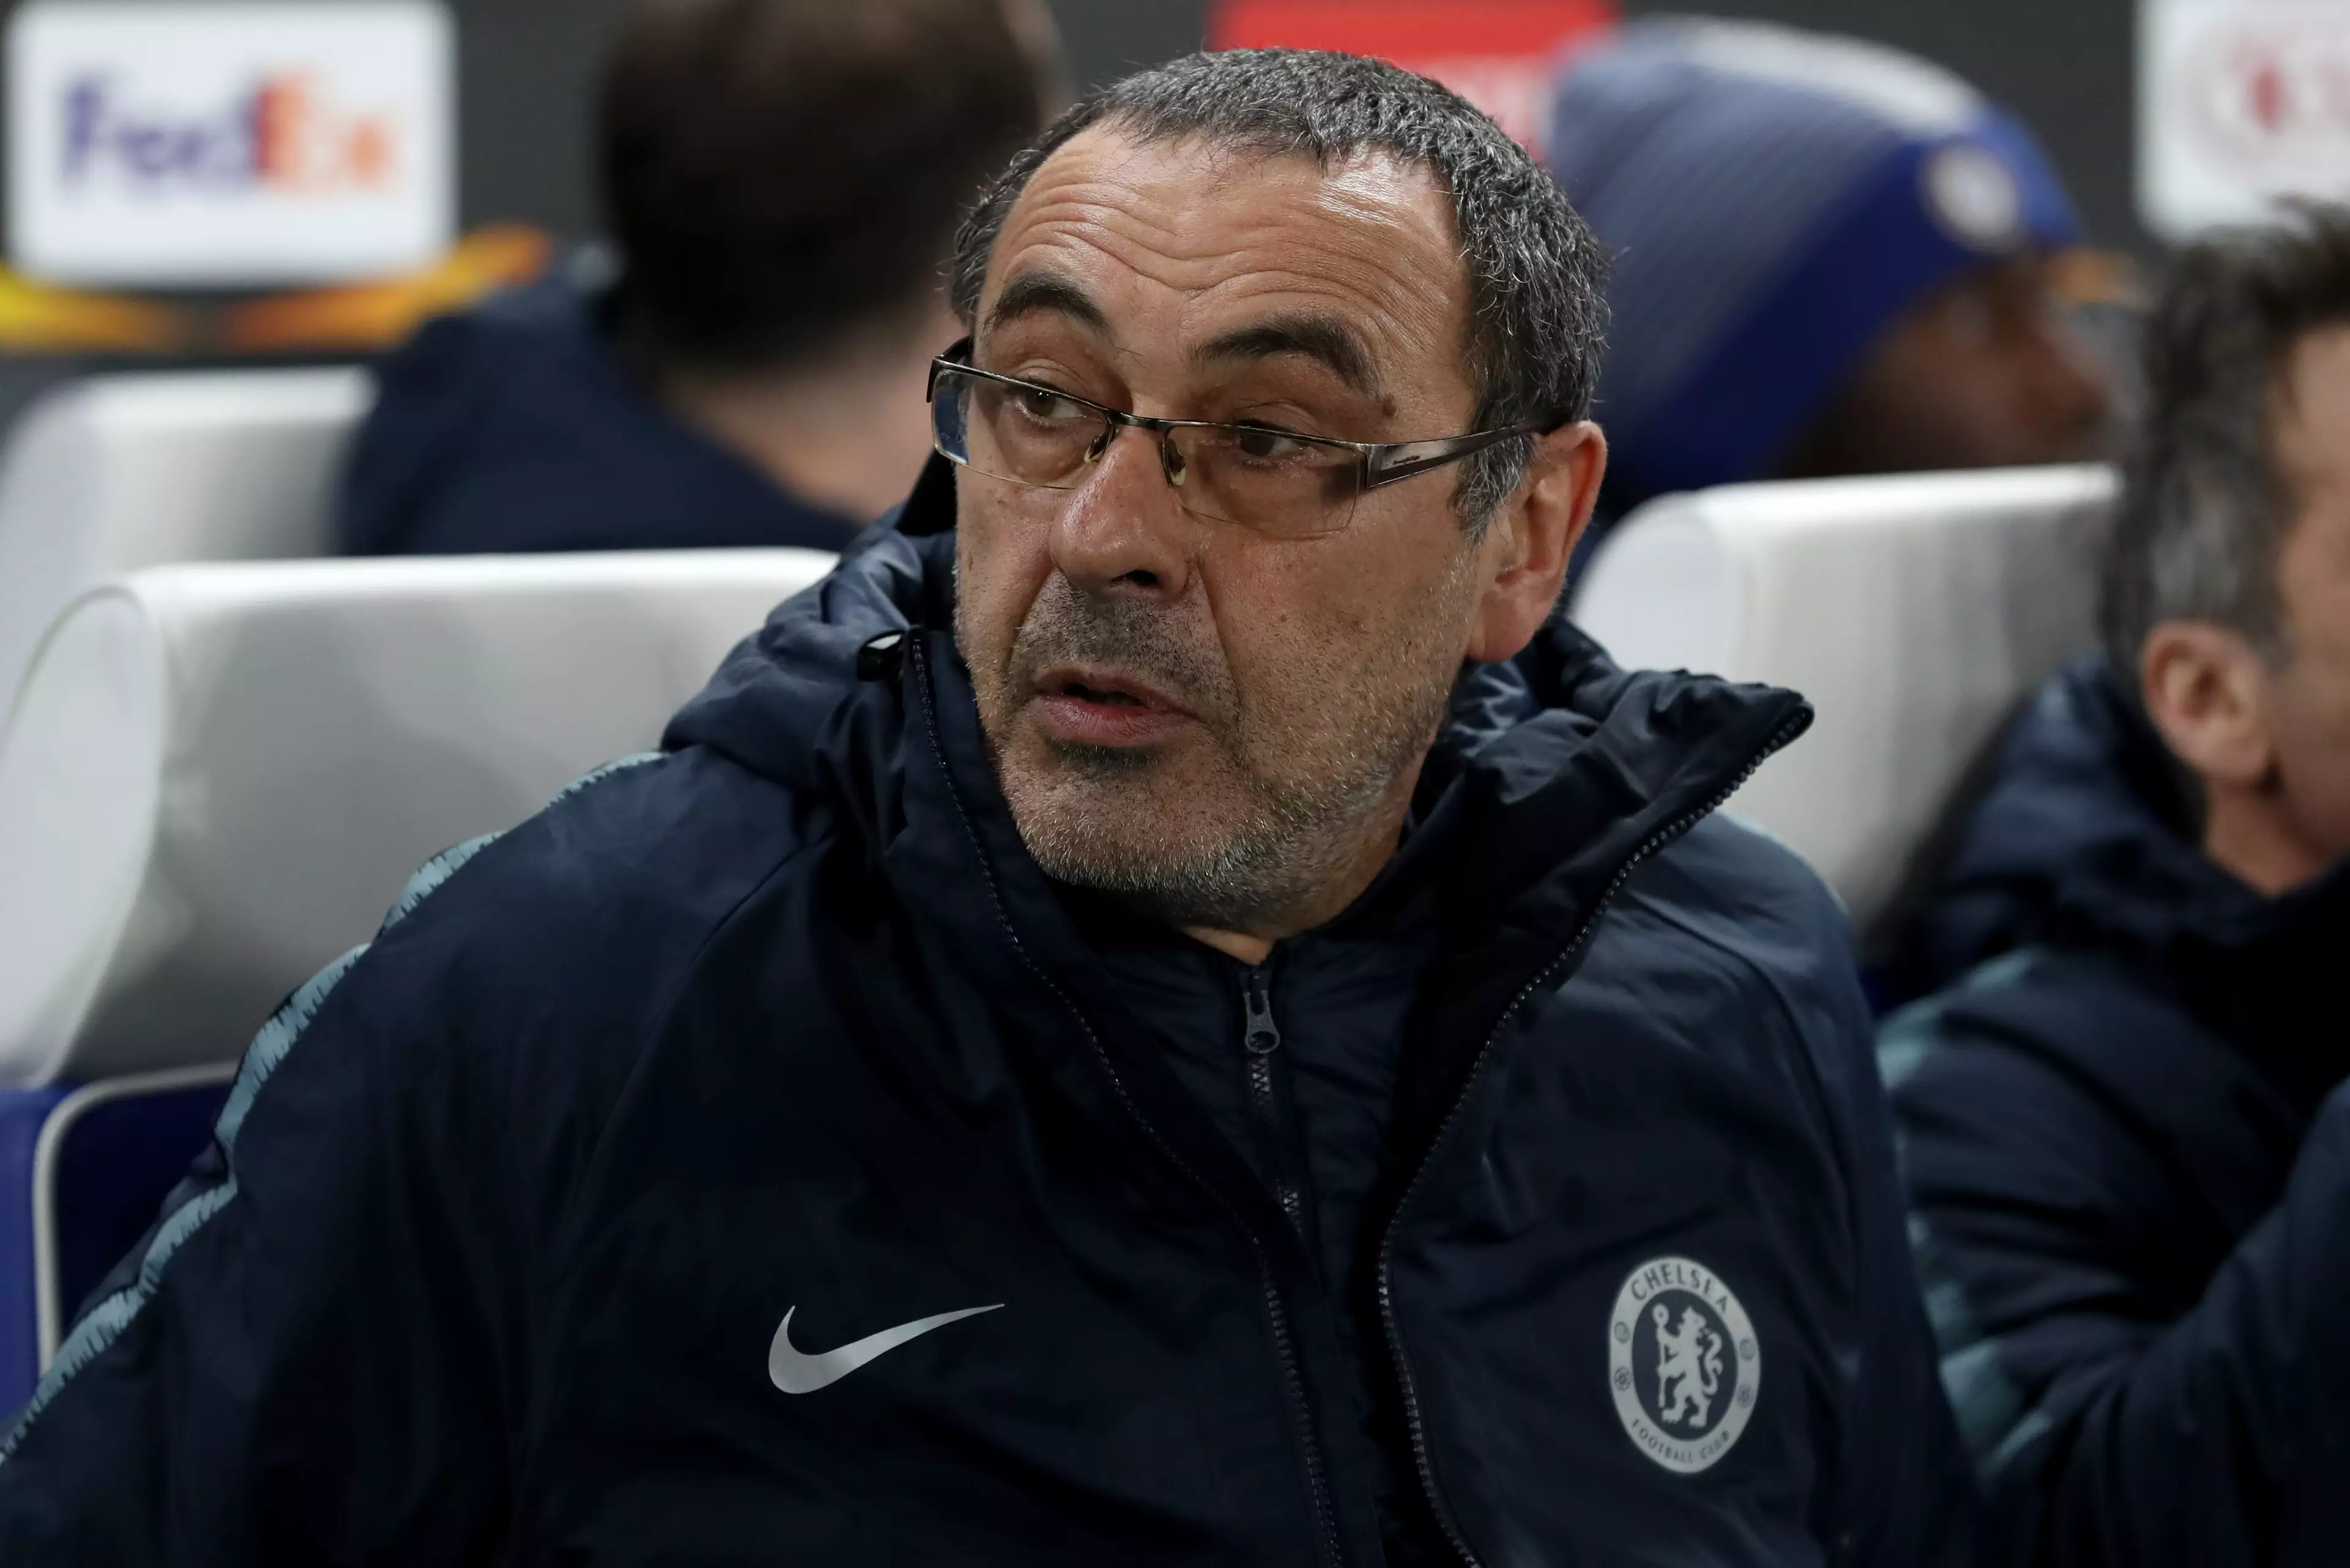 It's not good news for Sarri. Image: PA Images